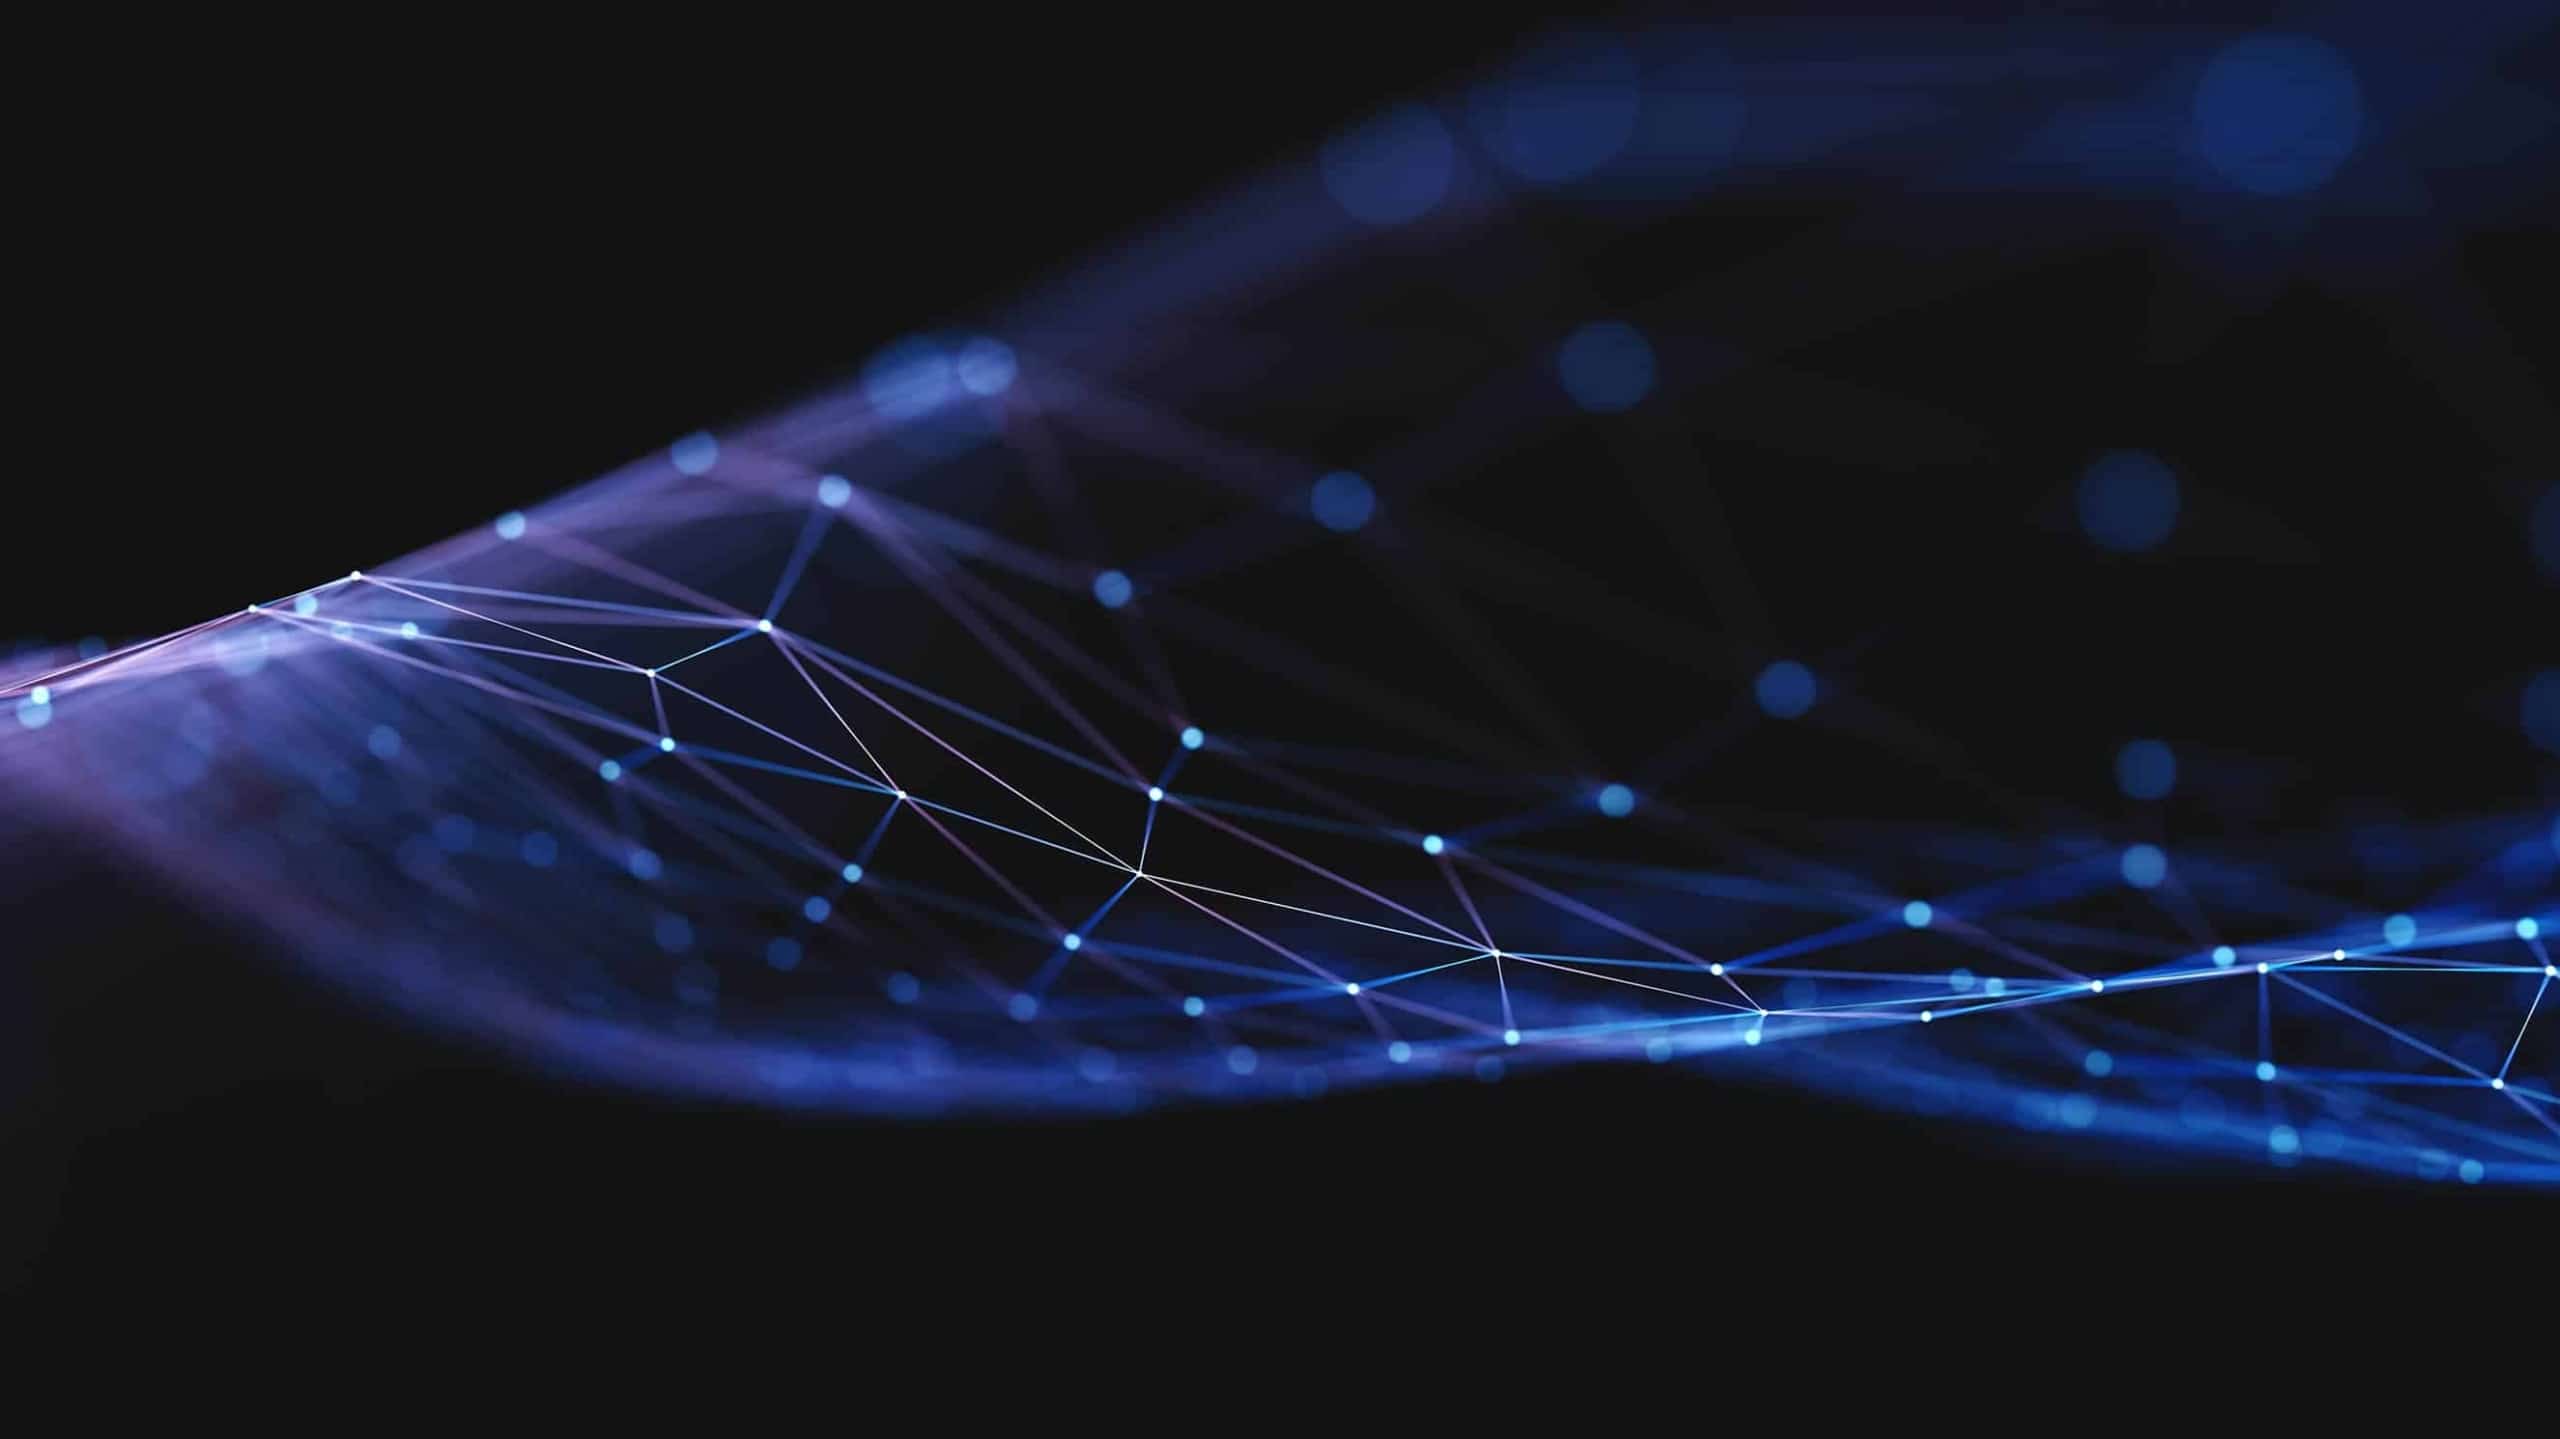 Abstract image of a digital network, featuring glowing blue nodes connected by lines on a dark background to represent modern technology or data connection.